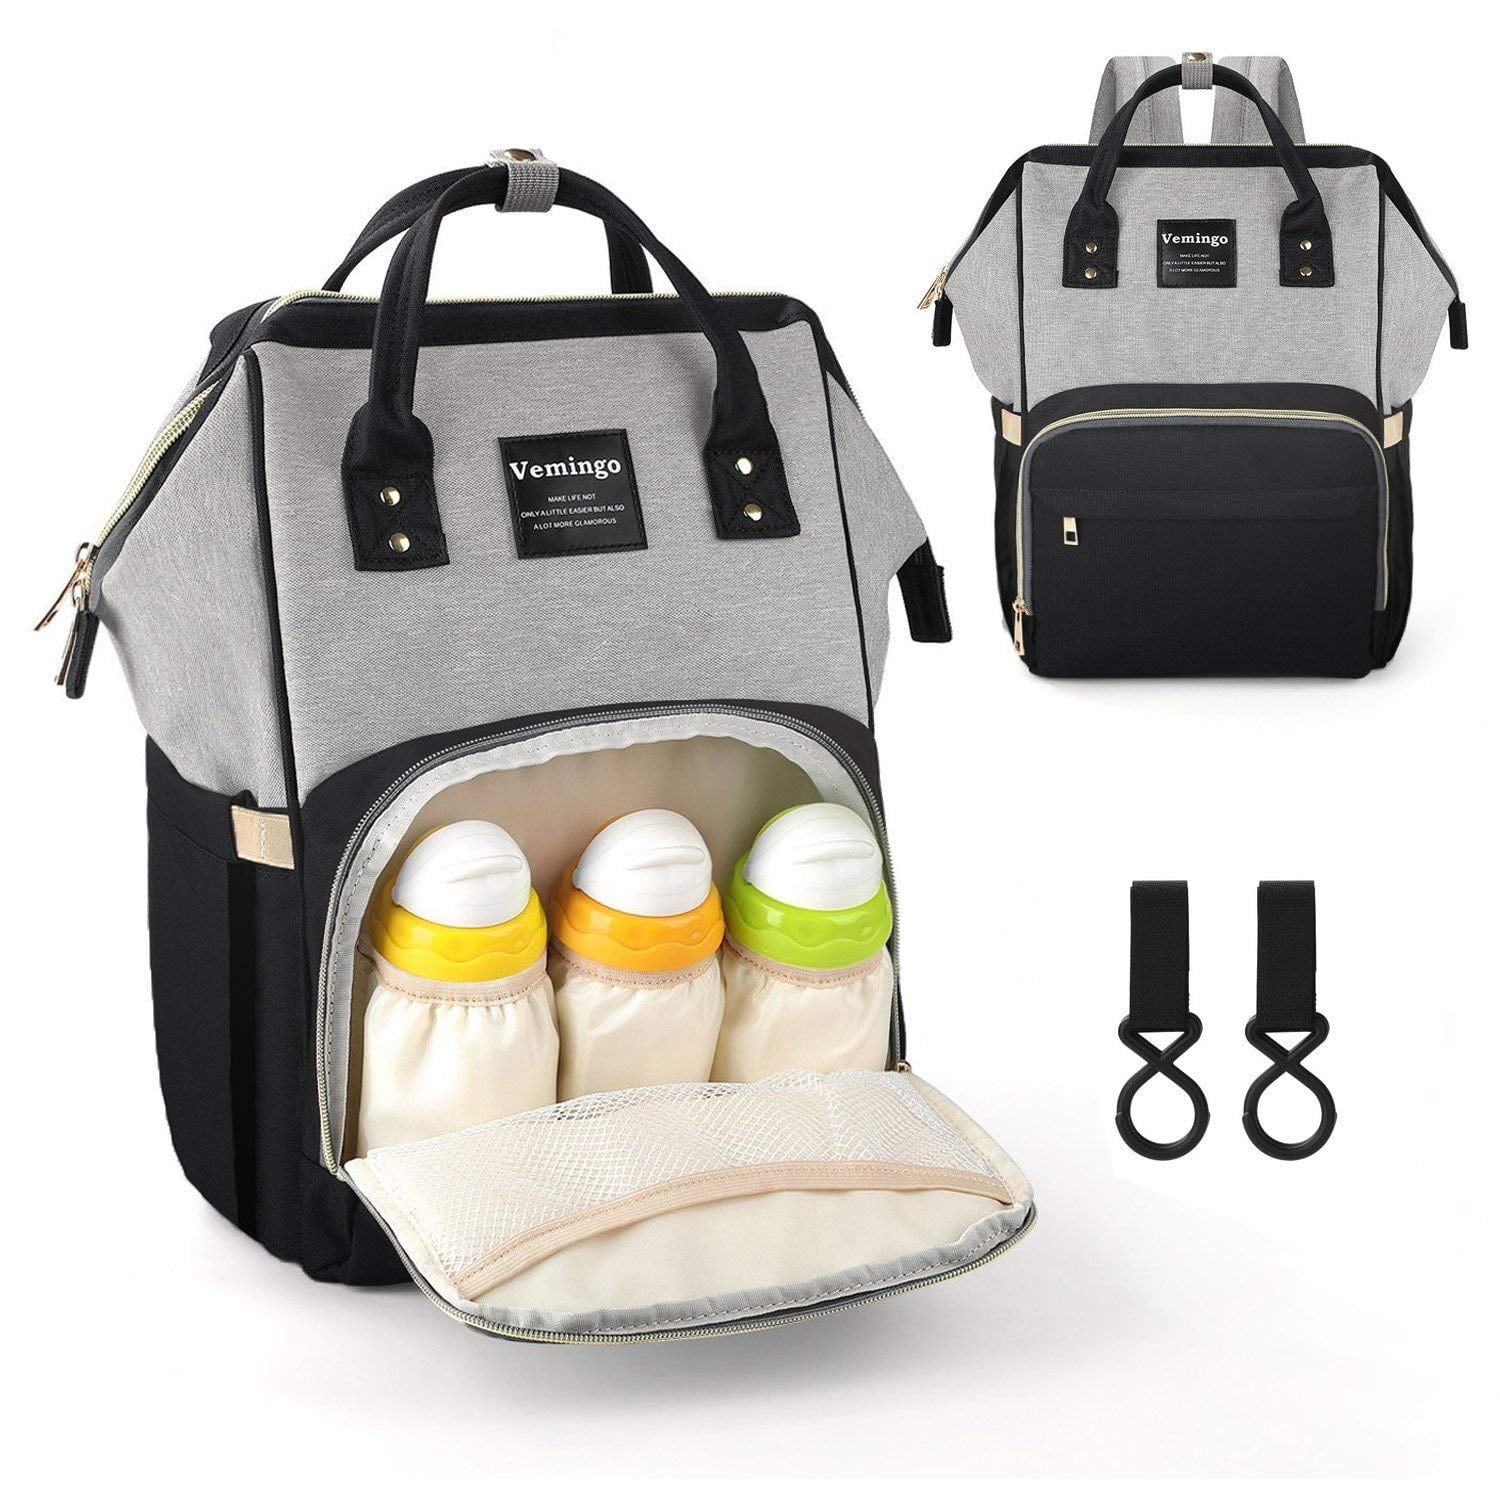 Vemingo Diaper Bag Backpack with Stroller Straps | Portable Baby Nappy Organizer Maternity Bags ...